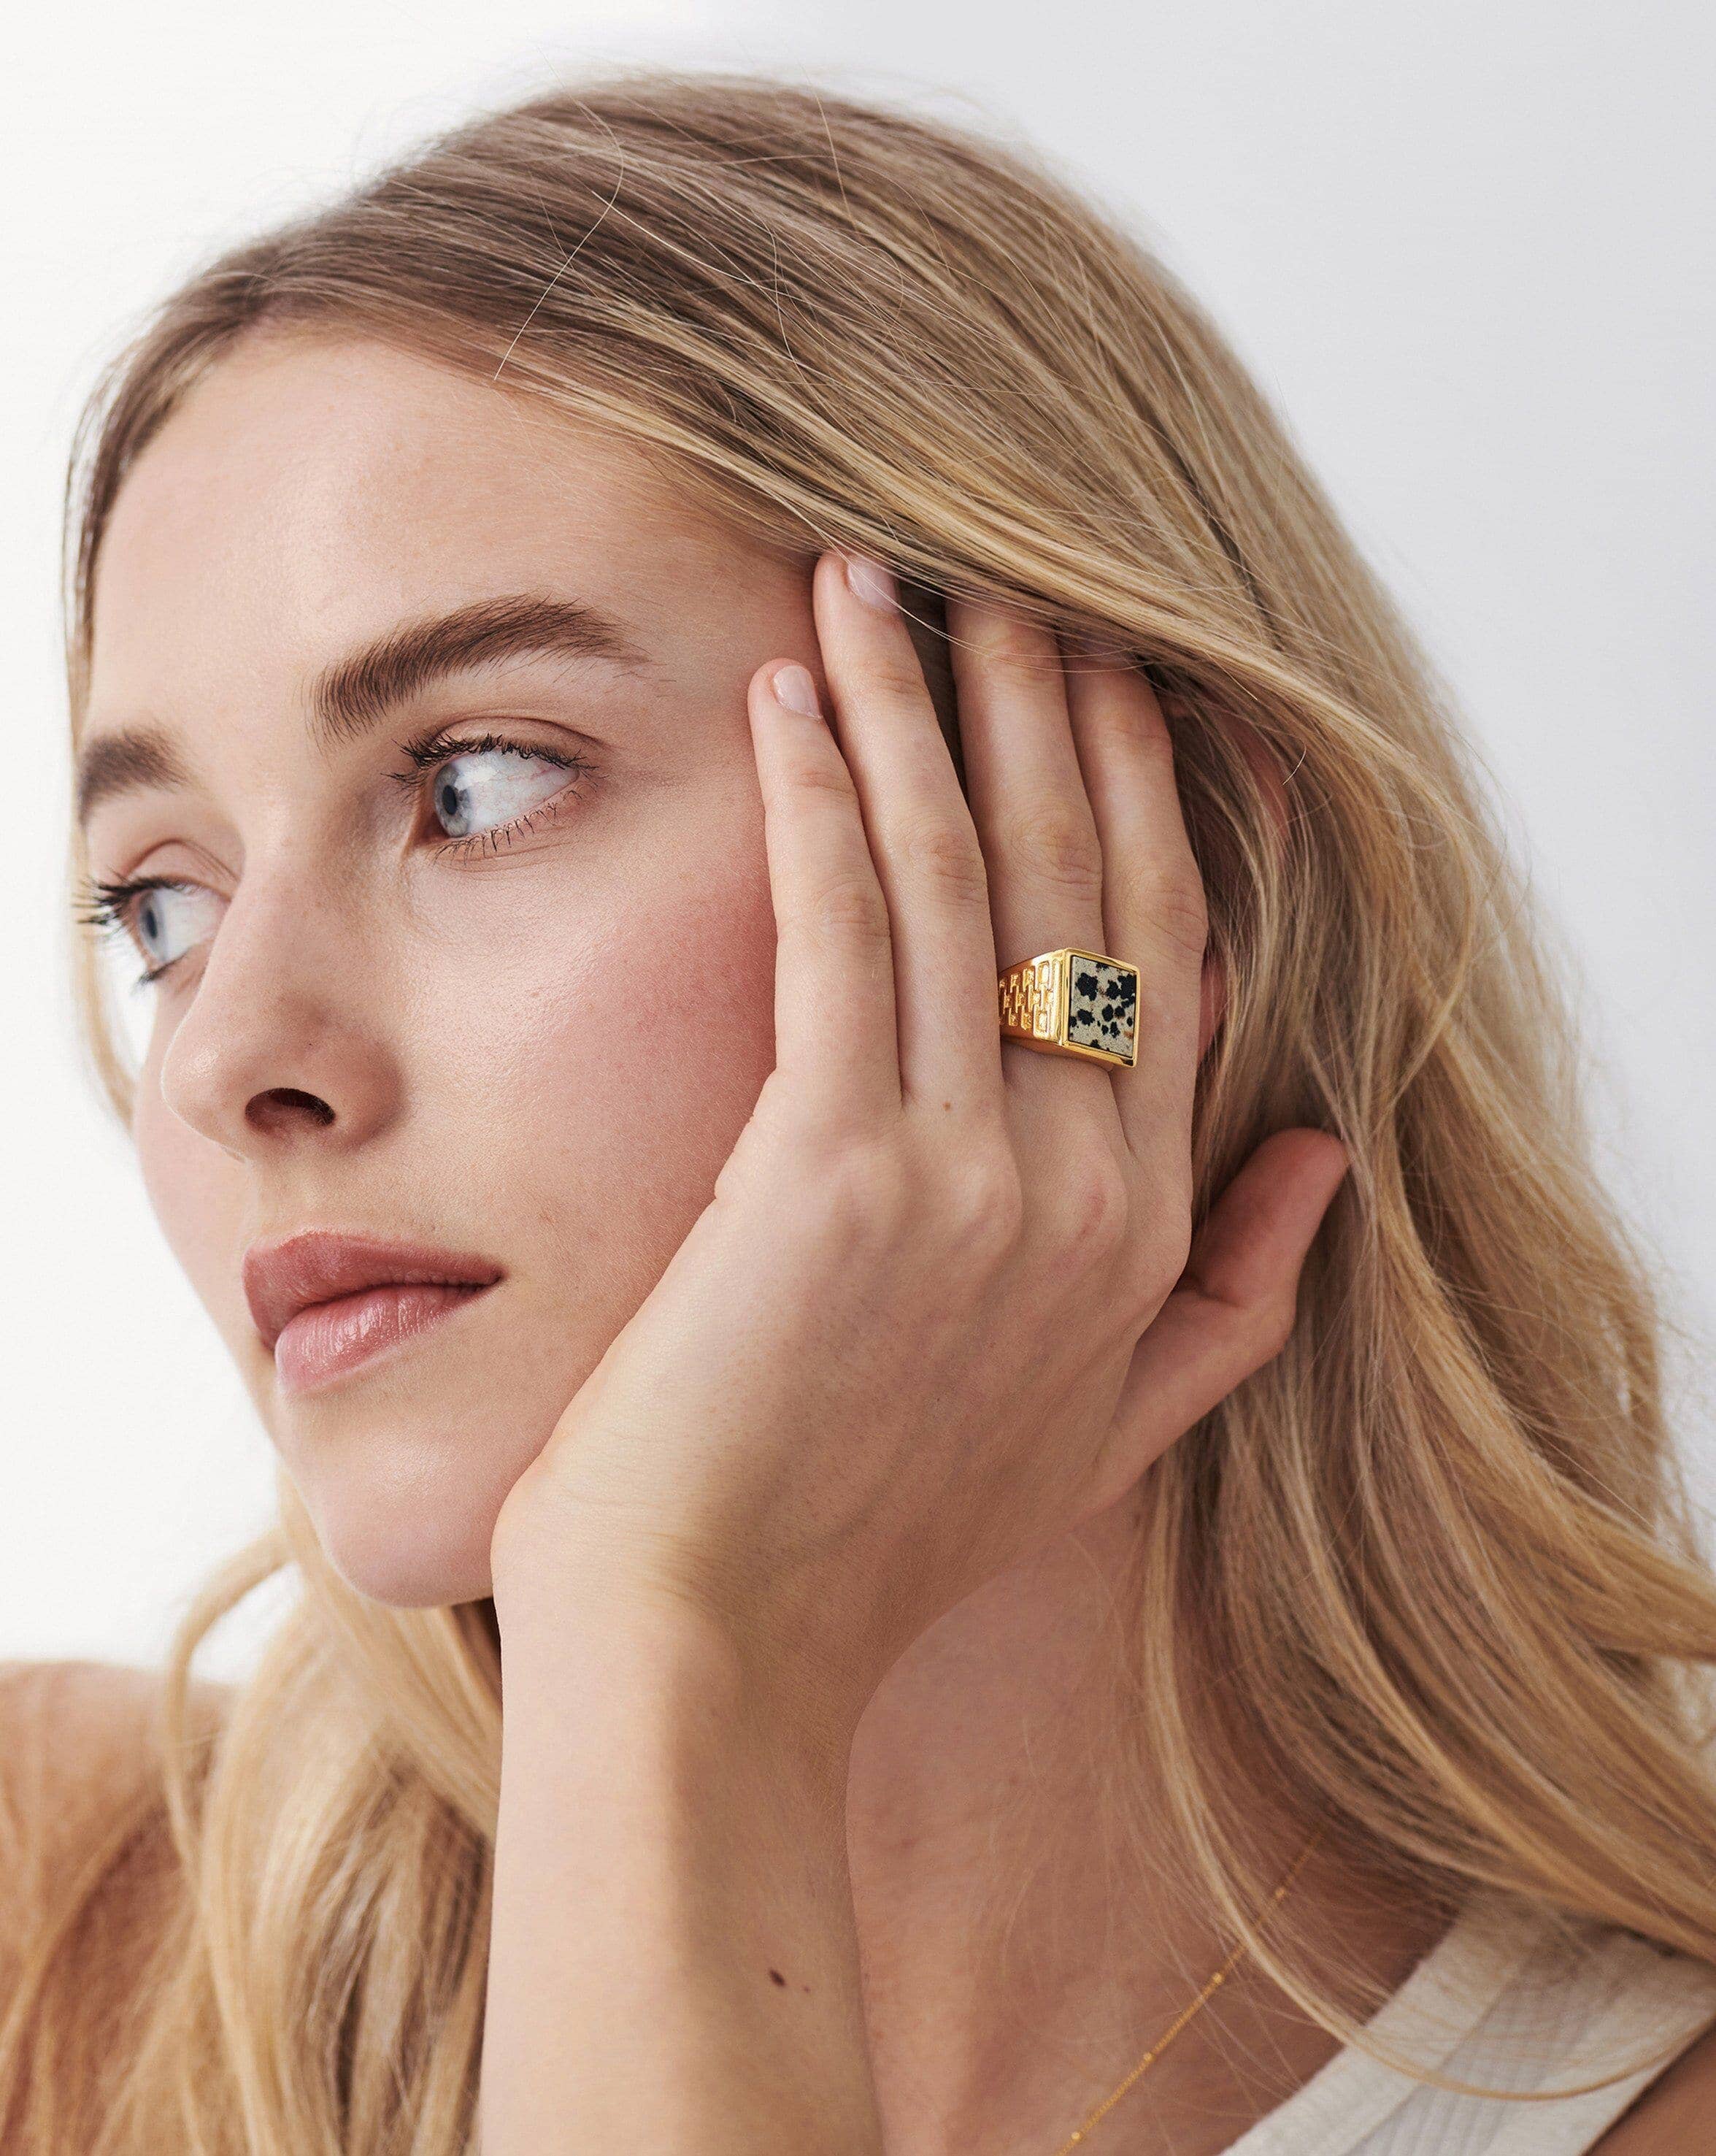 Fused Woven Gemstone Square Signet Ring | 18ct Gold Plated Vermeil/Dalmation Jasper Rings Missoma 